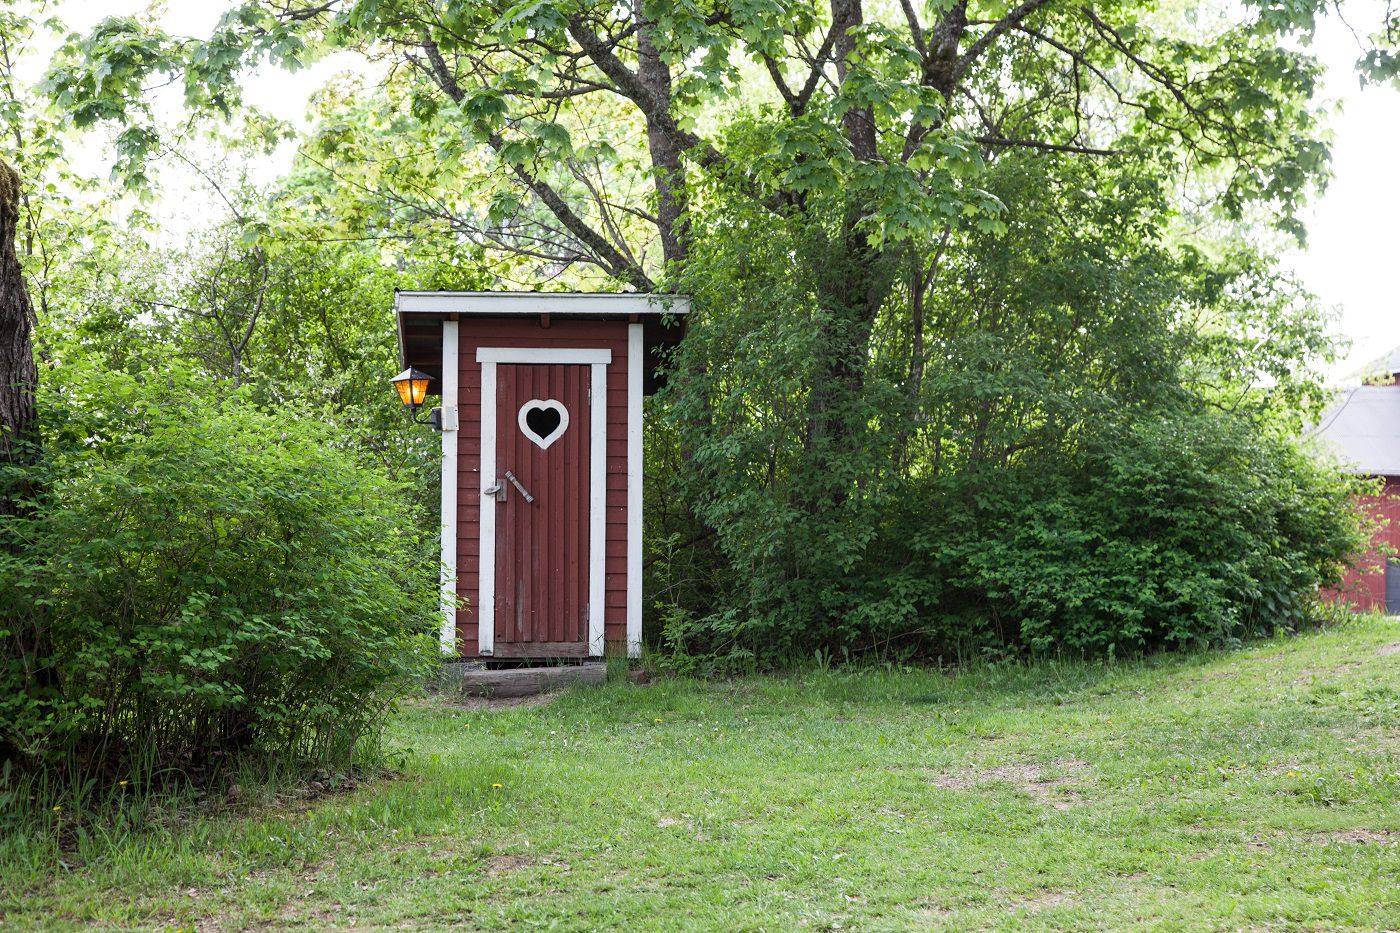 DIY Composting Toilets: 3 Tips for Success